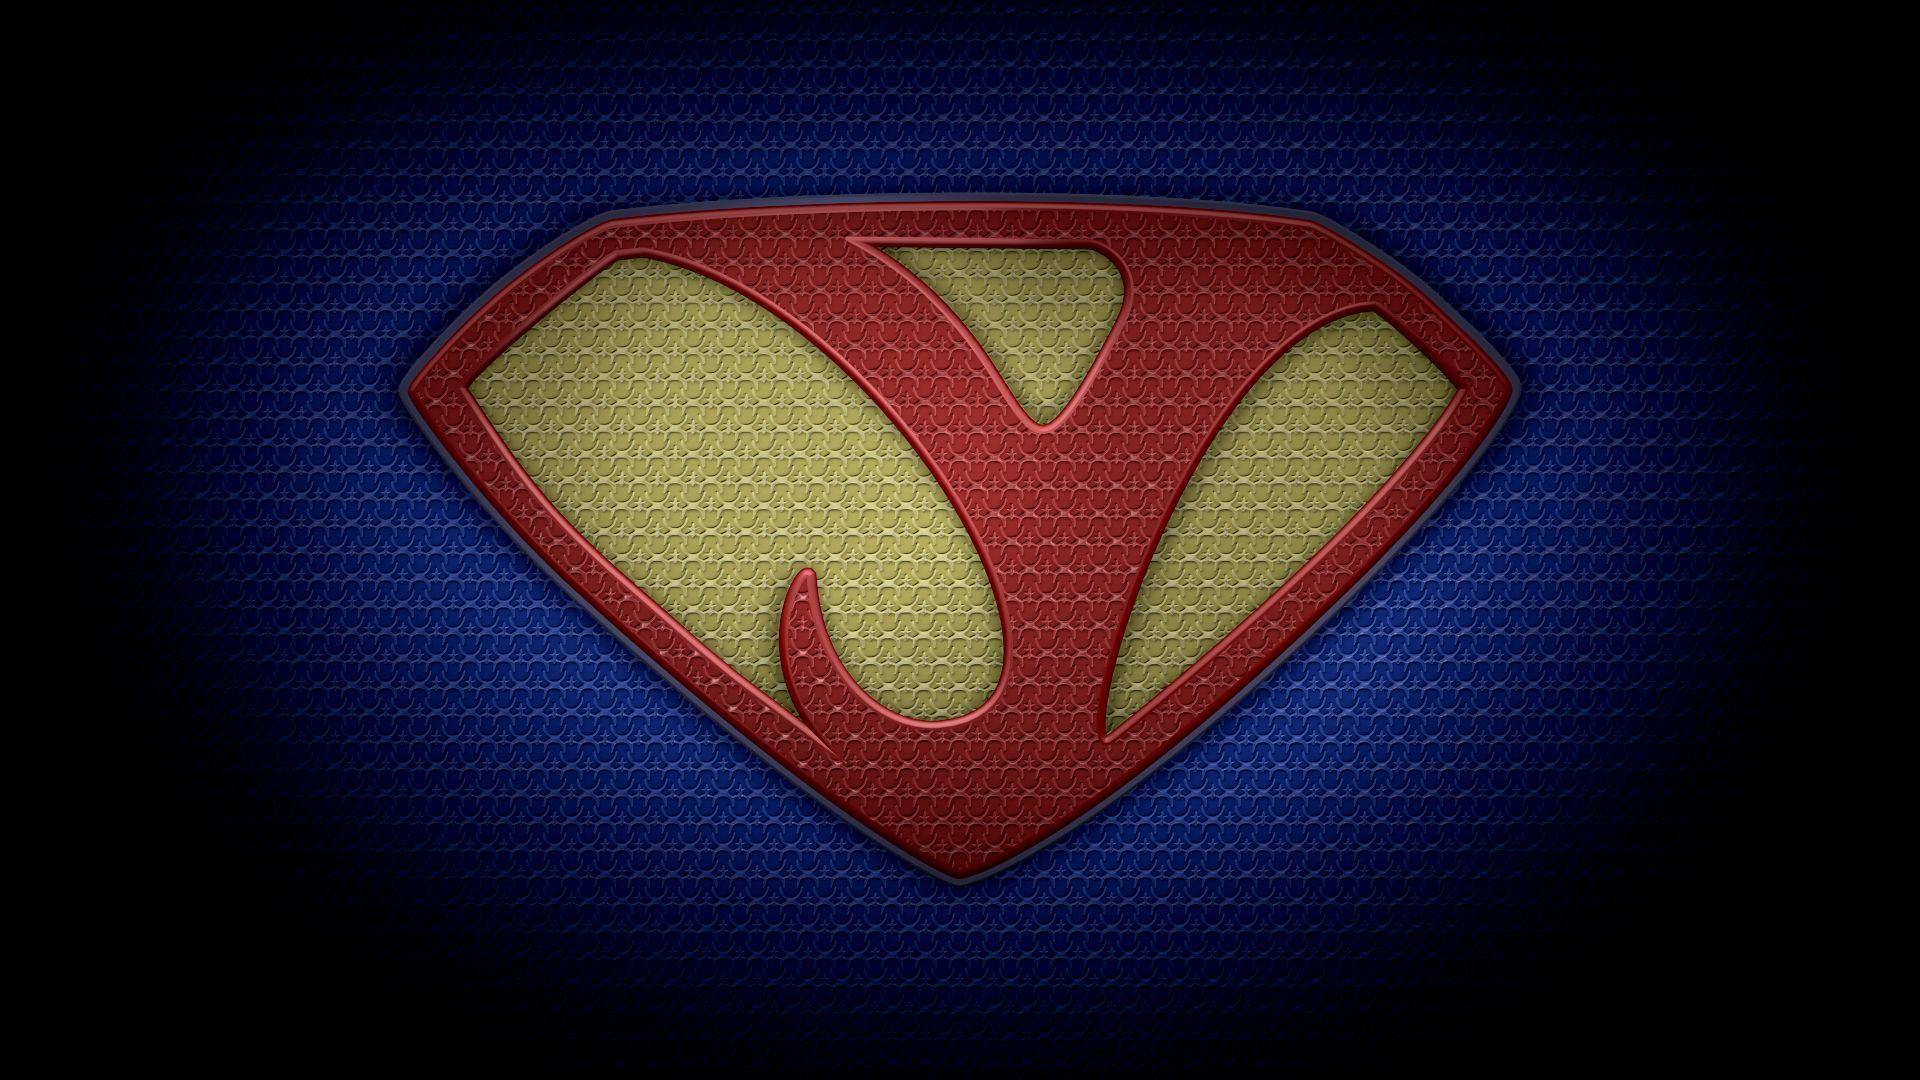 Man of Steel Y Logo - The letter Y in the style of “Man of Steel”